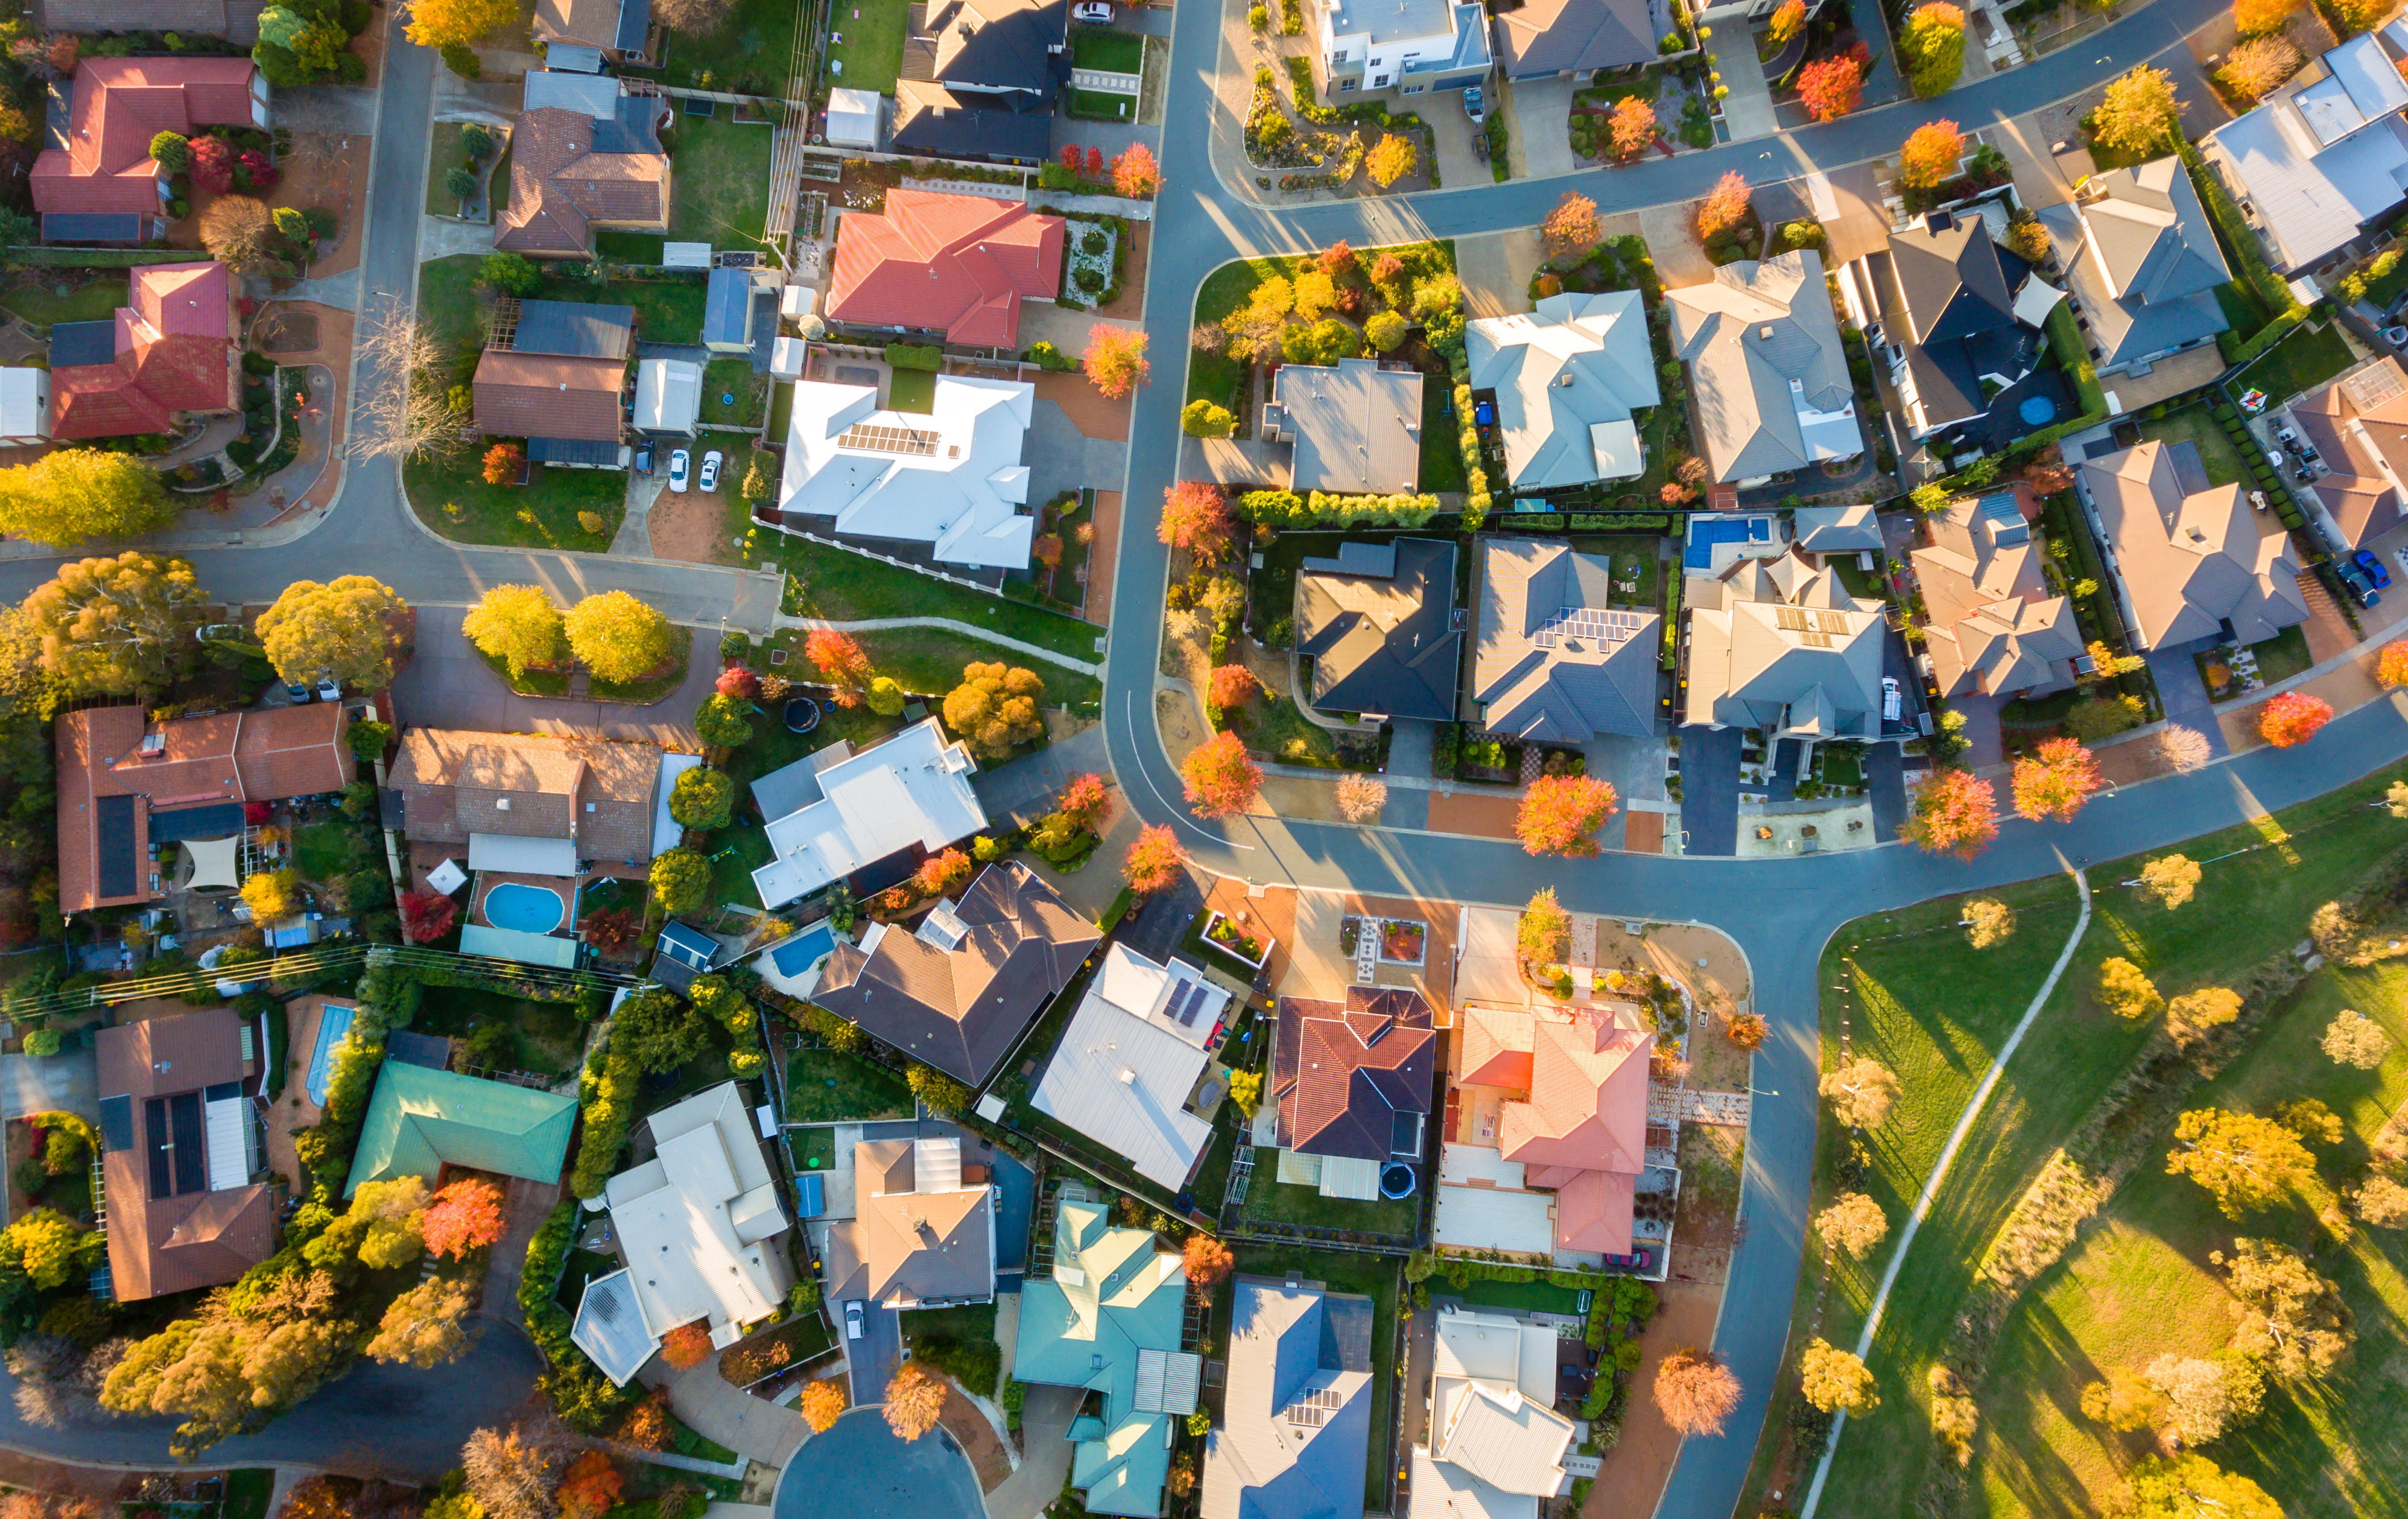 Planning and housing reform agenda boosts opportunities for Australia’s cities